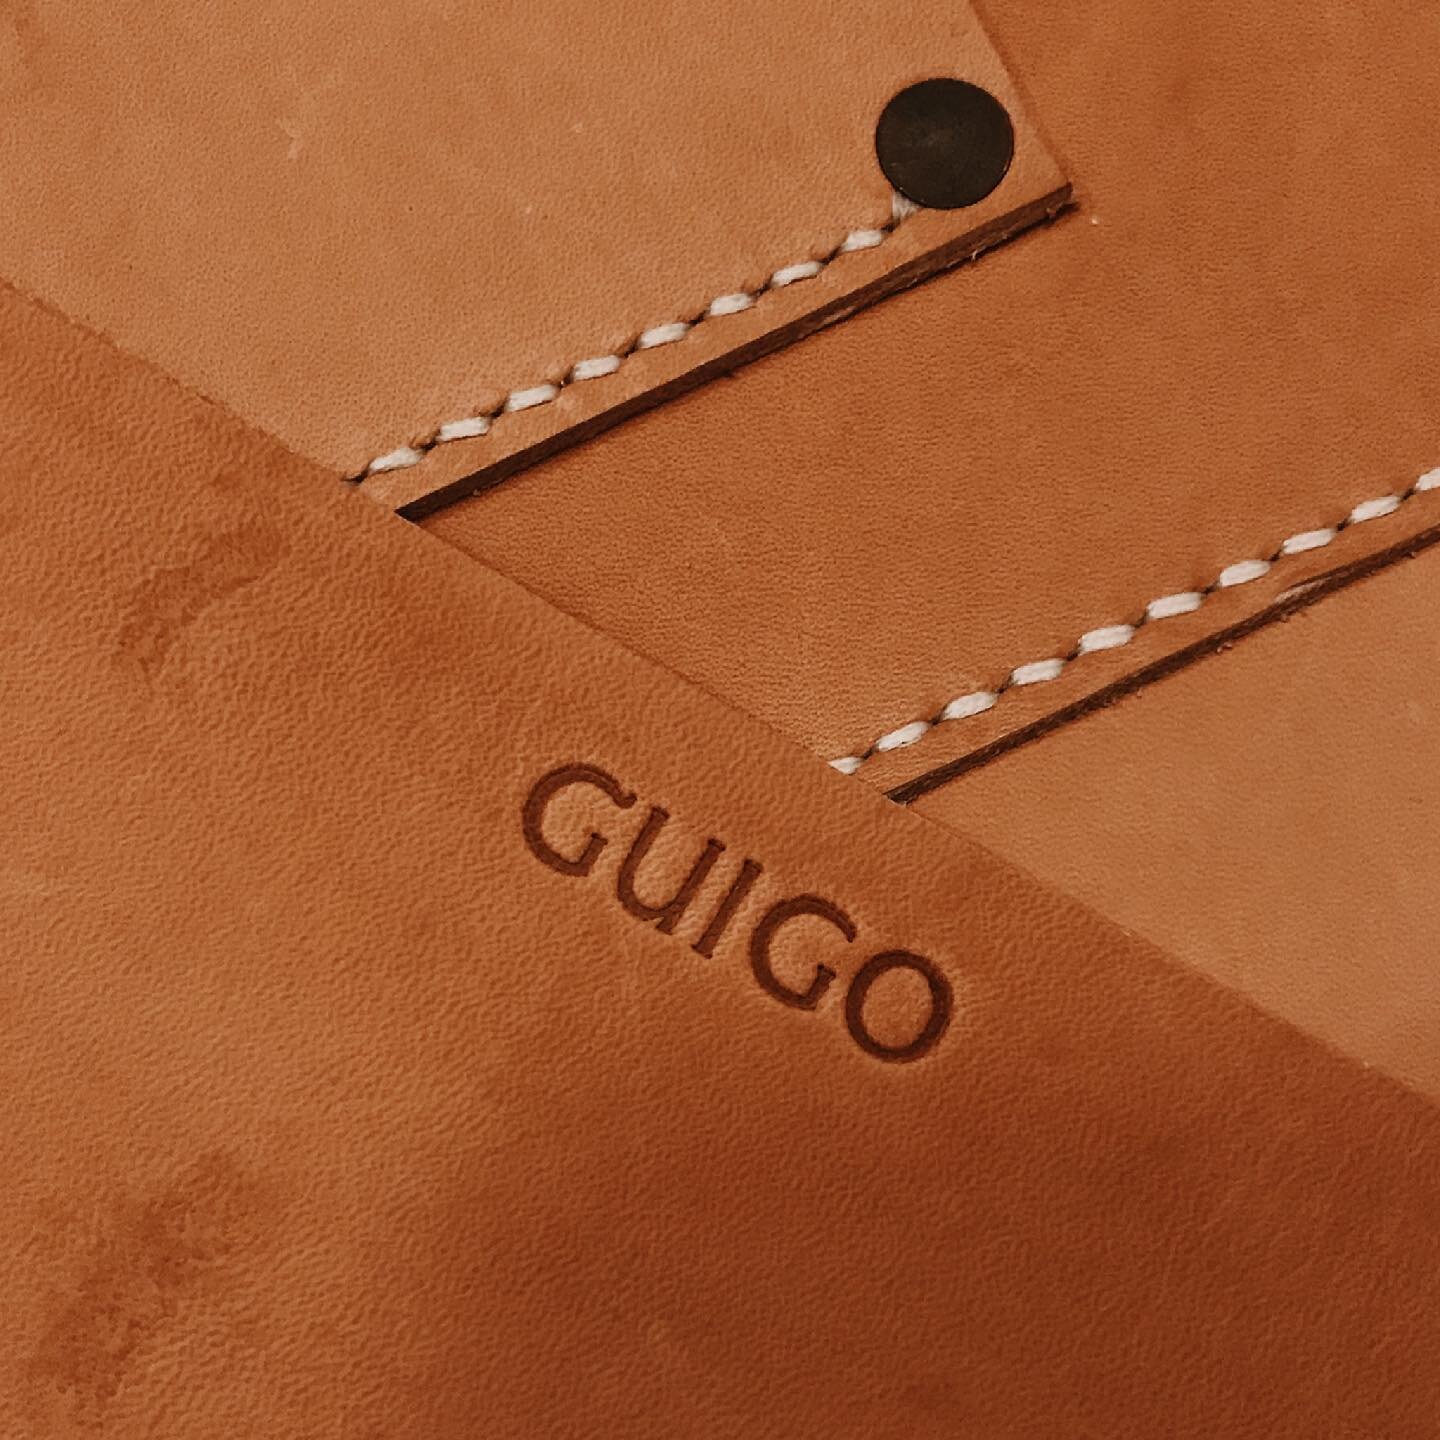 &ldquo;Guigo&rdquo; is a nickname my father gave me when I was a toddler &ndash; it stuck to this day. Using it to brand work that makes me feel like a kid in a playroom feels appropriate. ✨